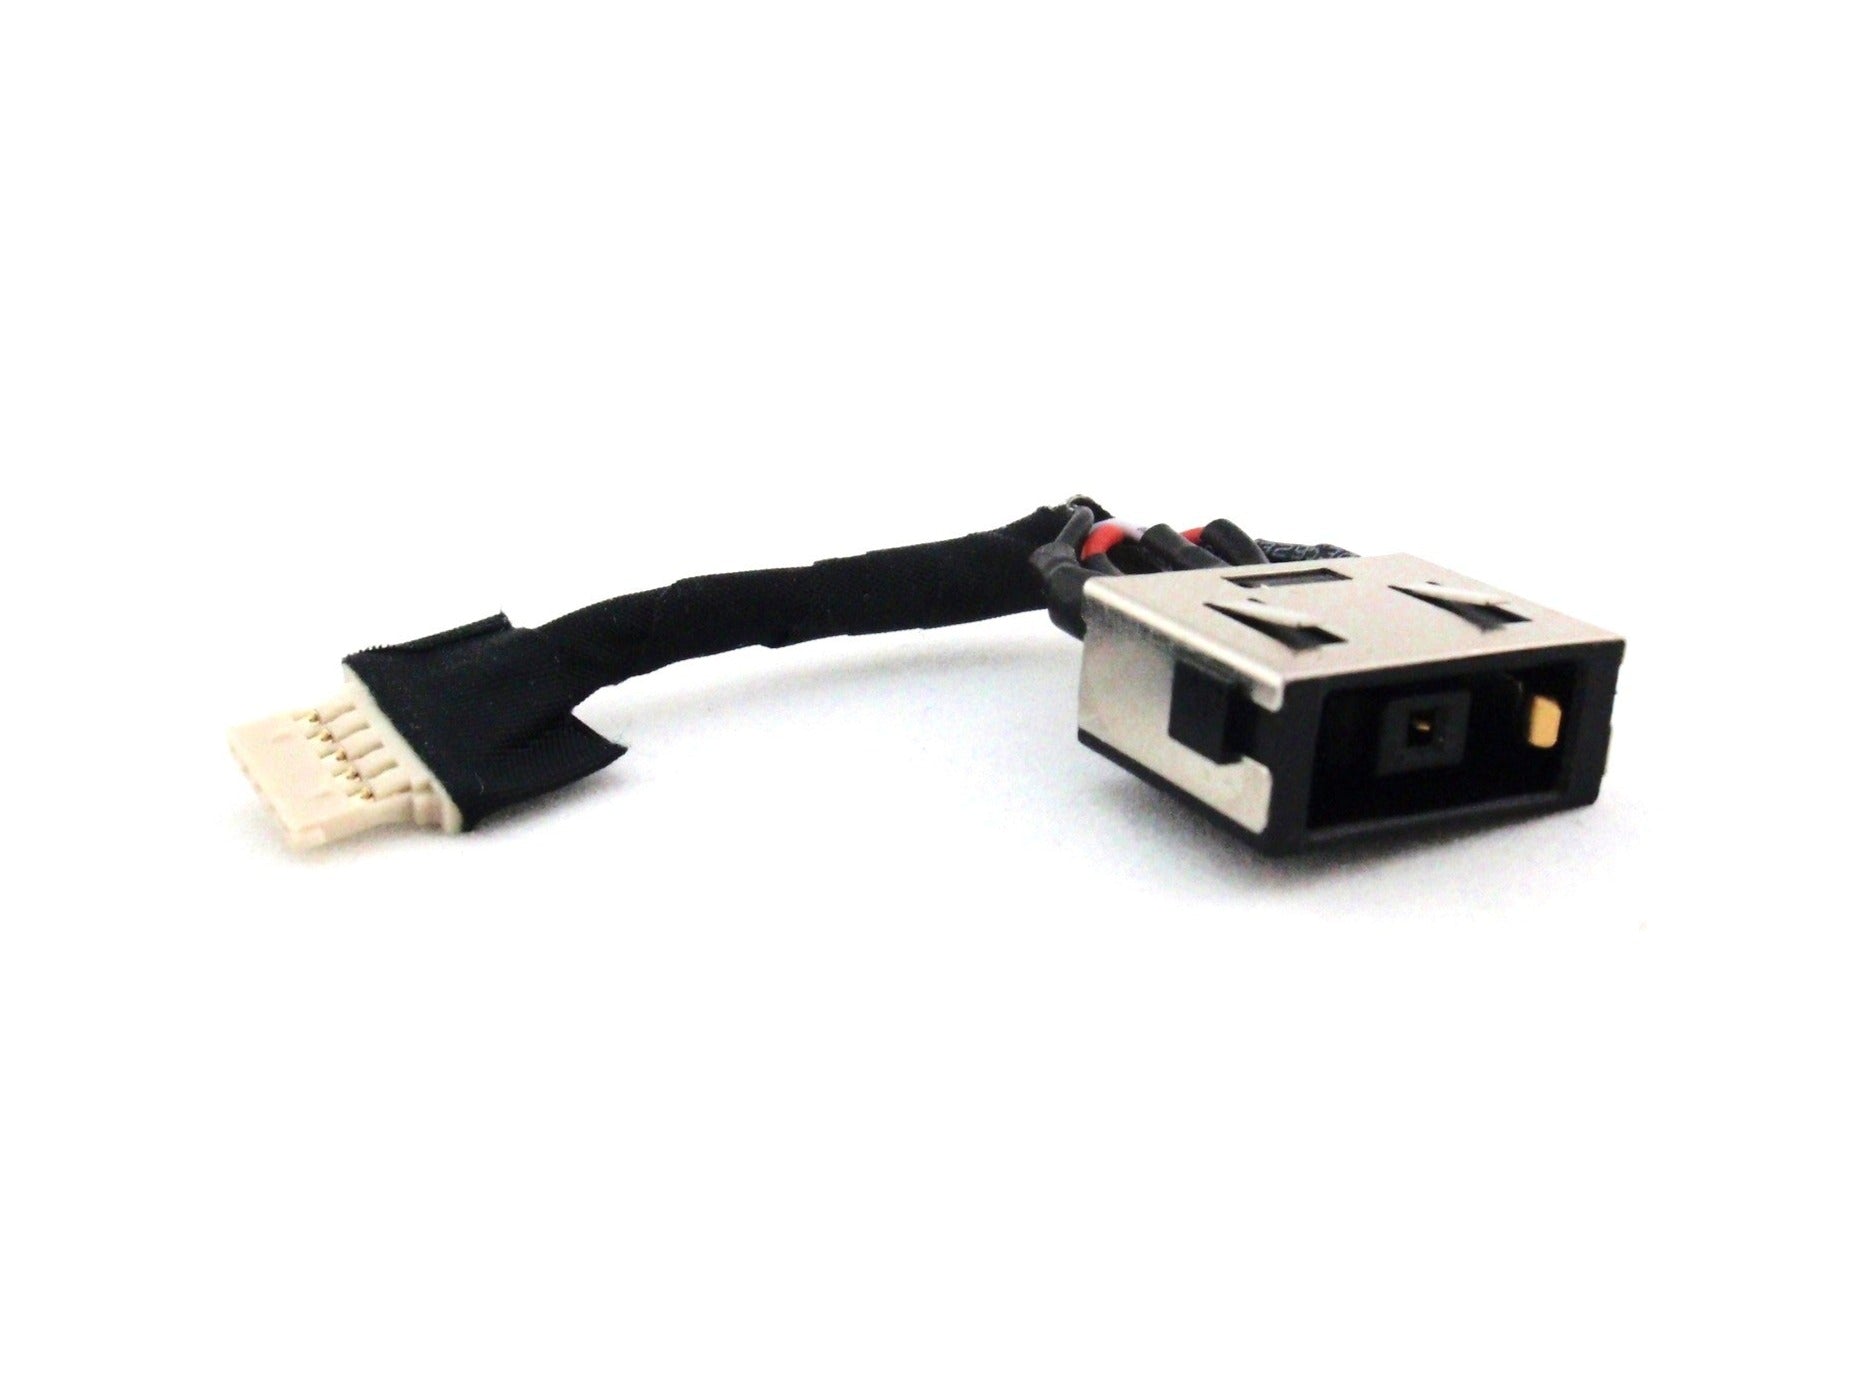 Lenovo New DC In Power Jack Charging Port Cable DC30100L600 Yoga 2 11 20332 20343 20428 80CX 80DL 80GB 90204936